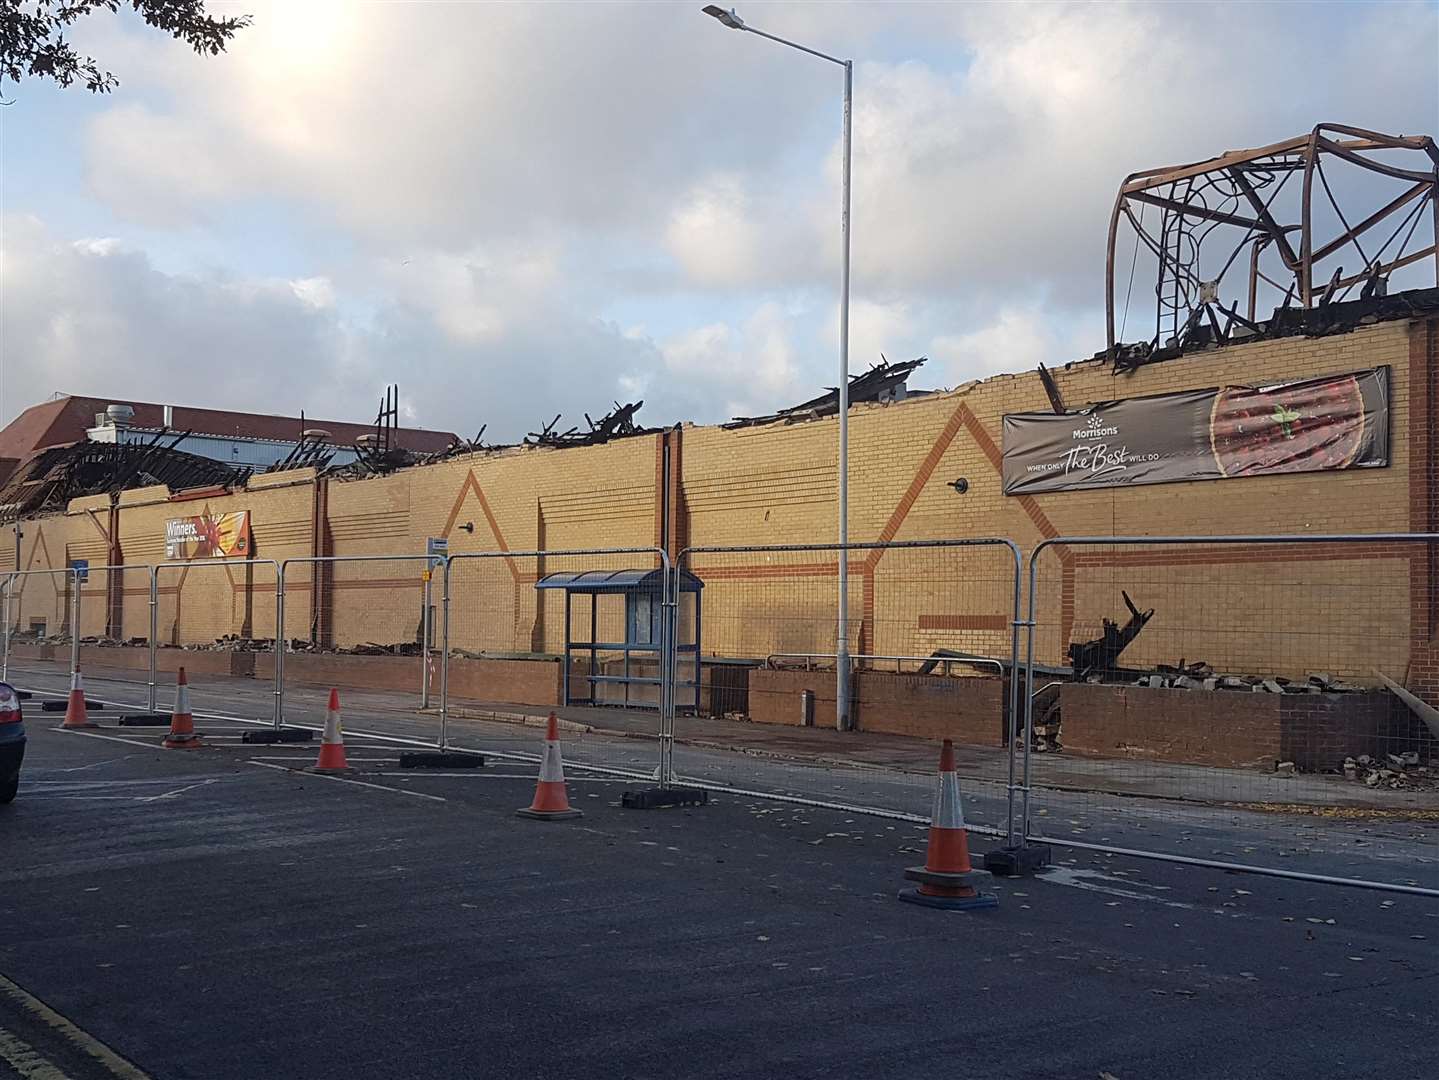 The aftermath of the Morrisons fire